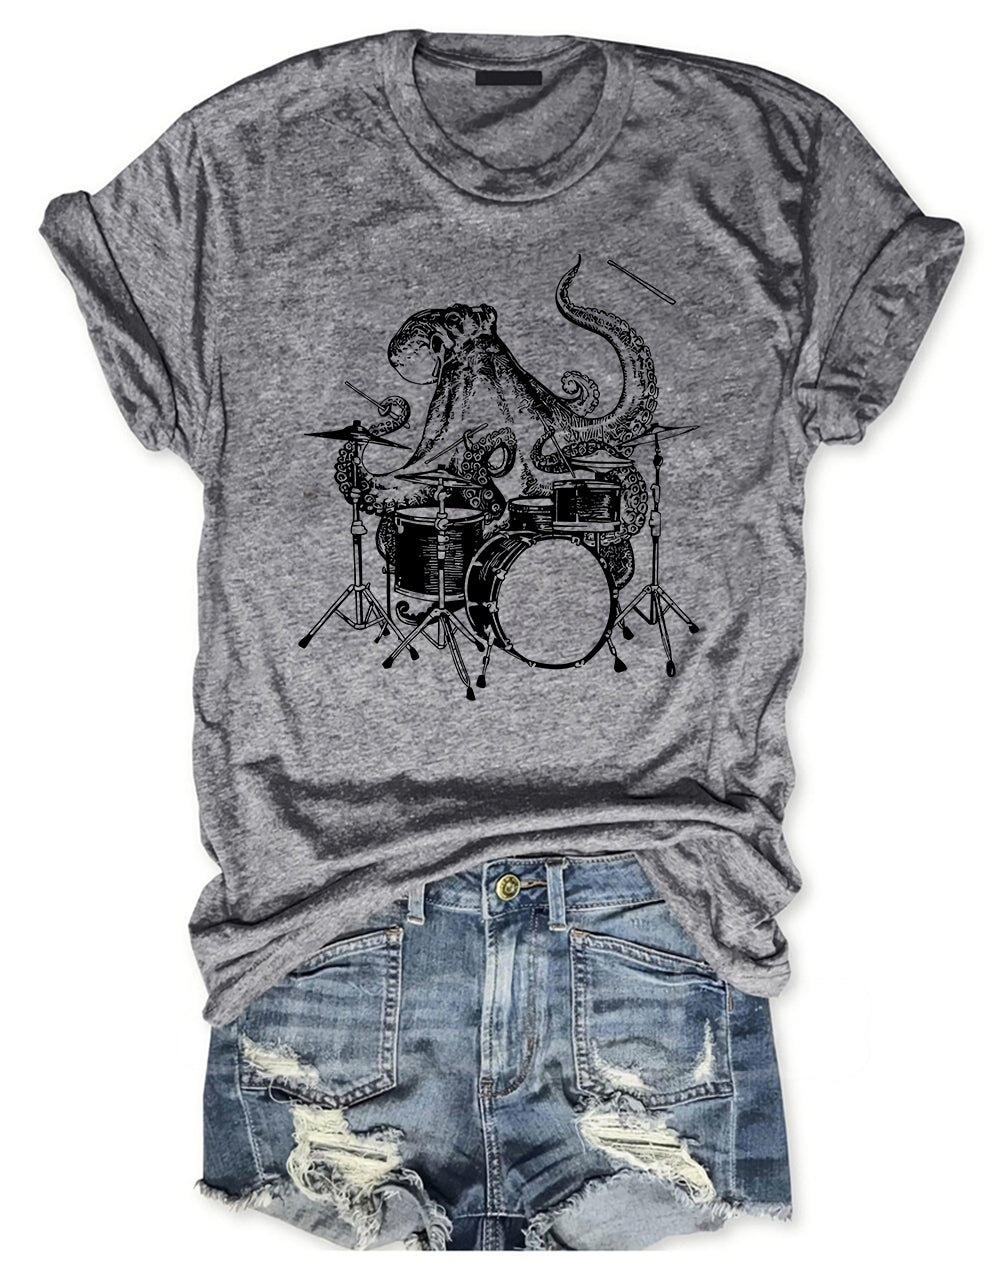 Octopus Playing Drums T-shirt